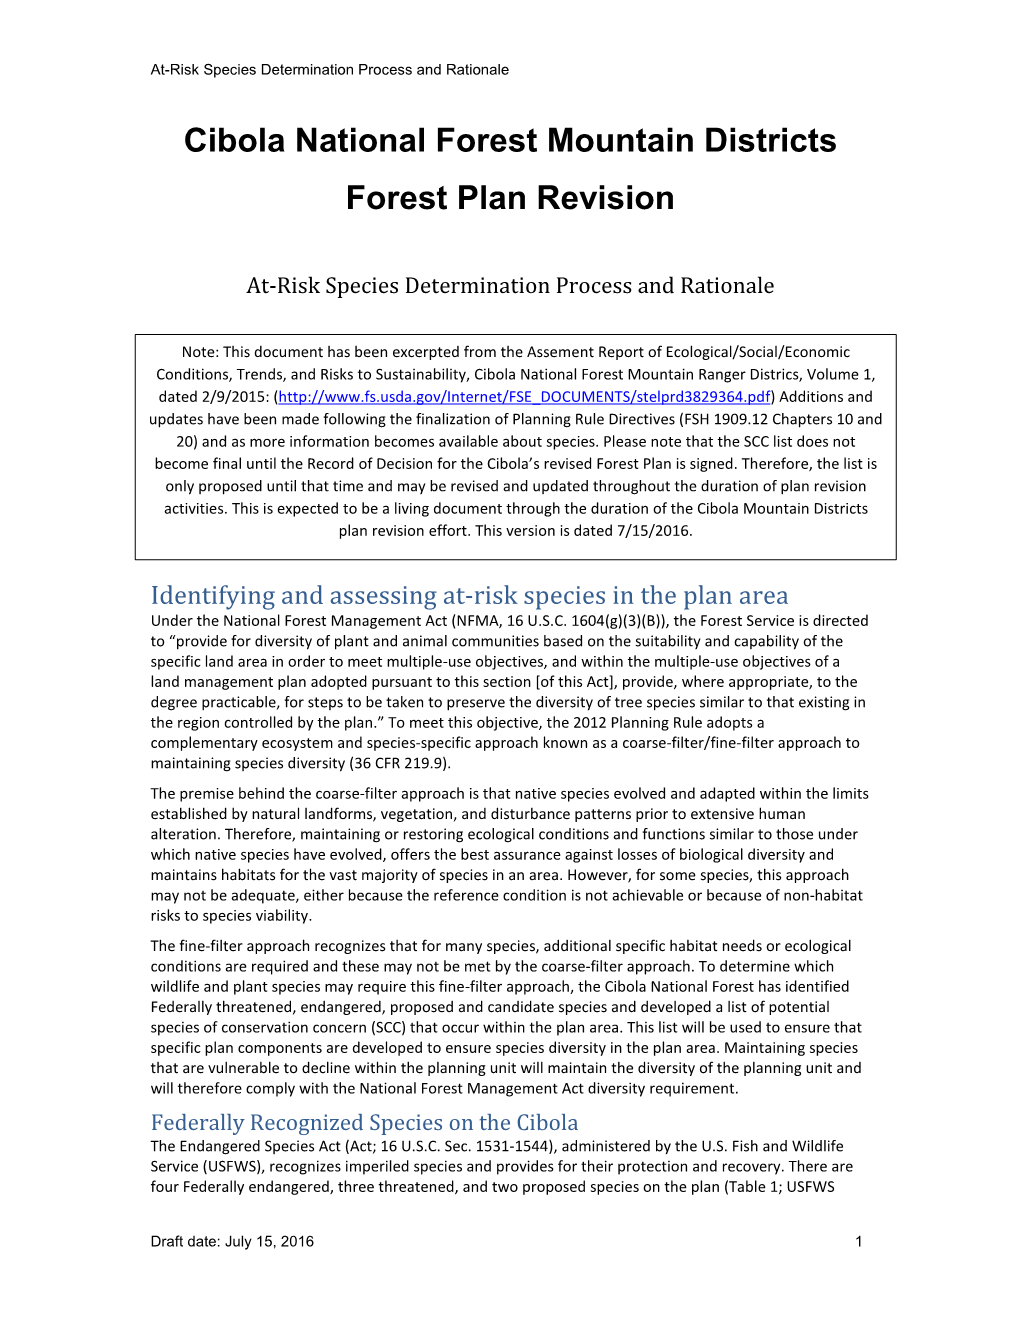 Cibola National Forest Mountain Districts Forest Plan Revision